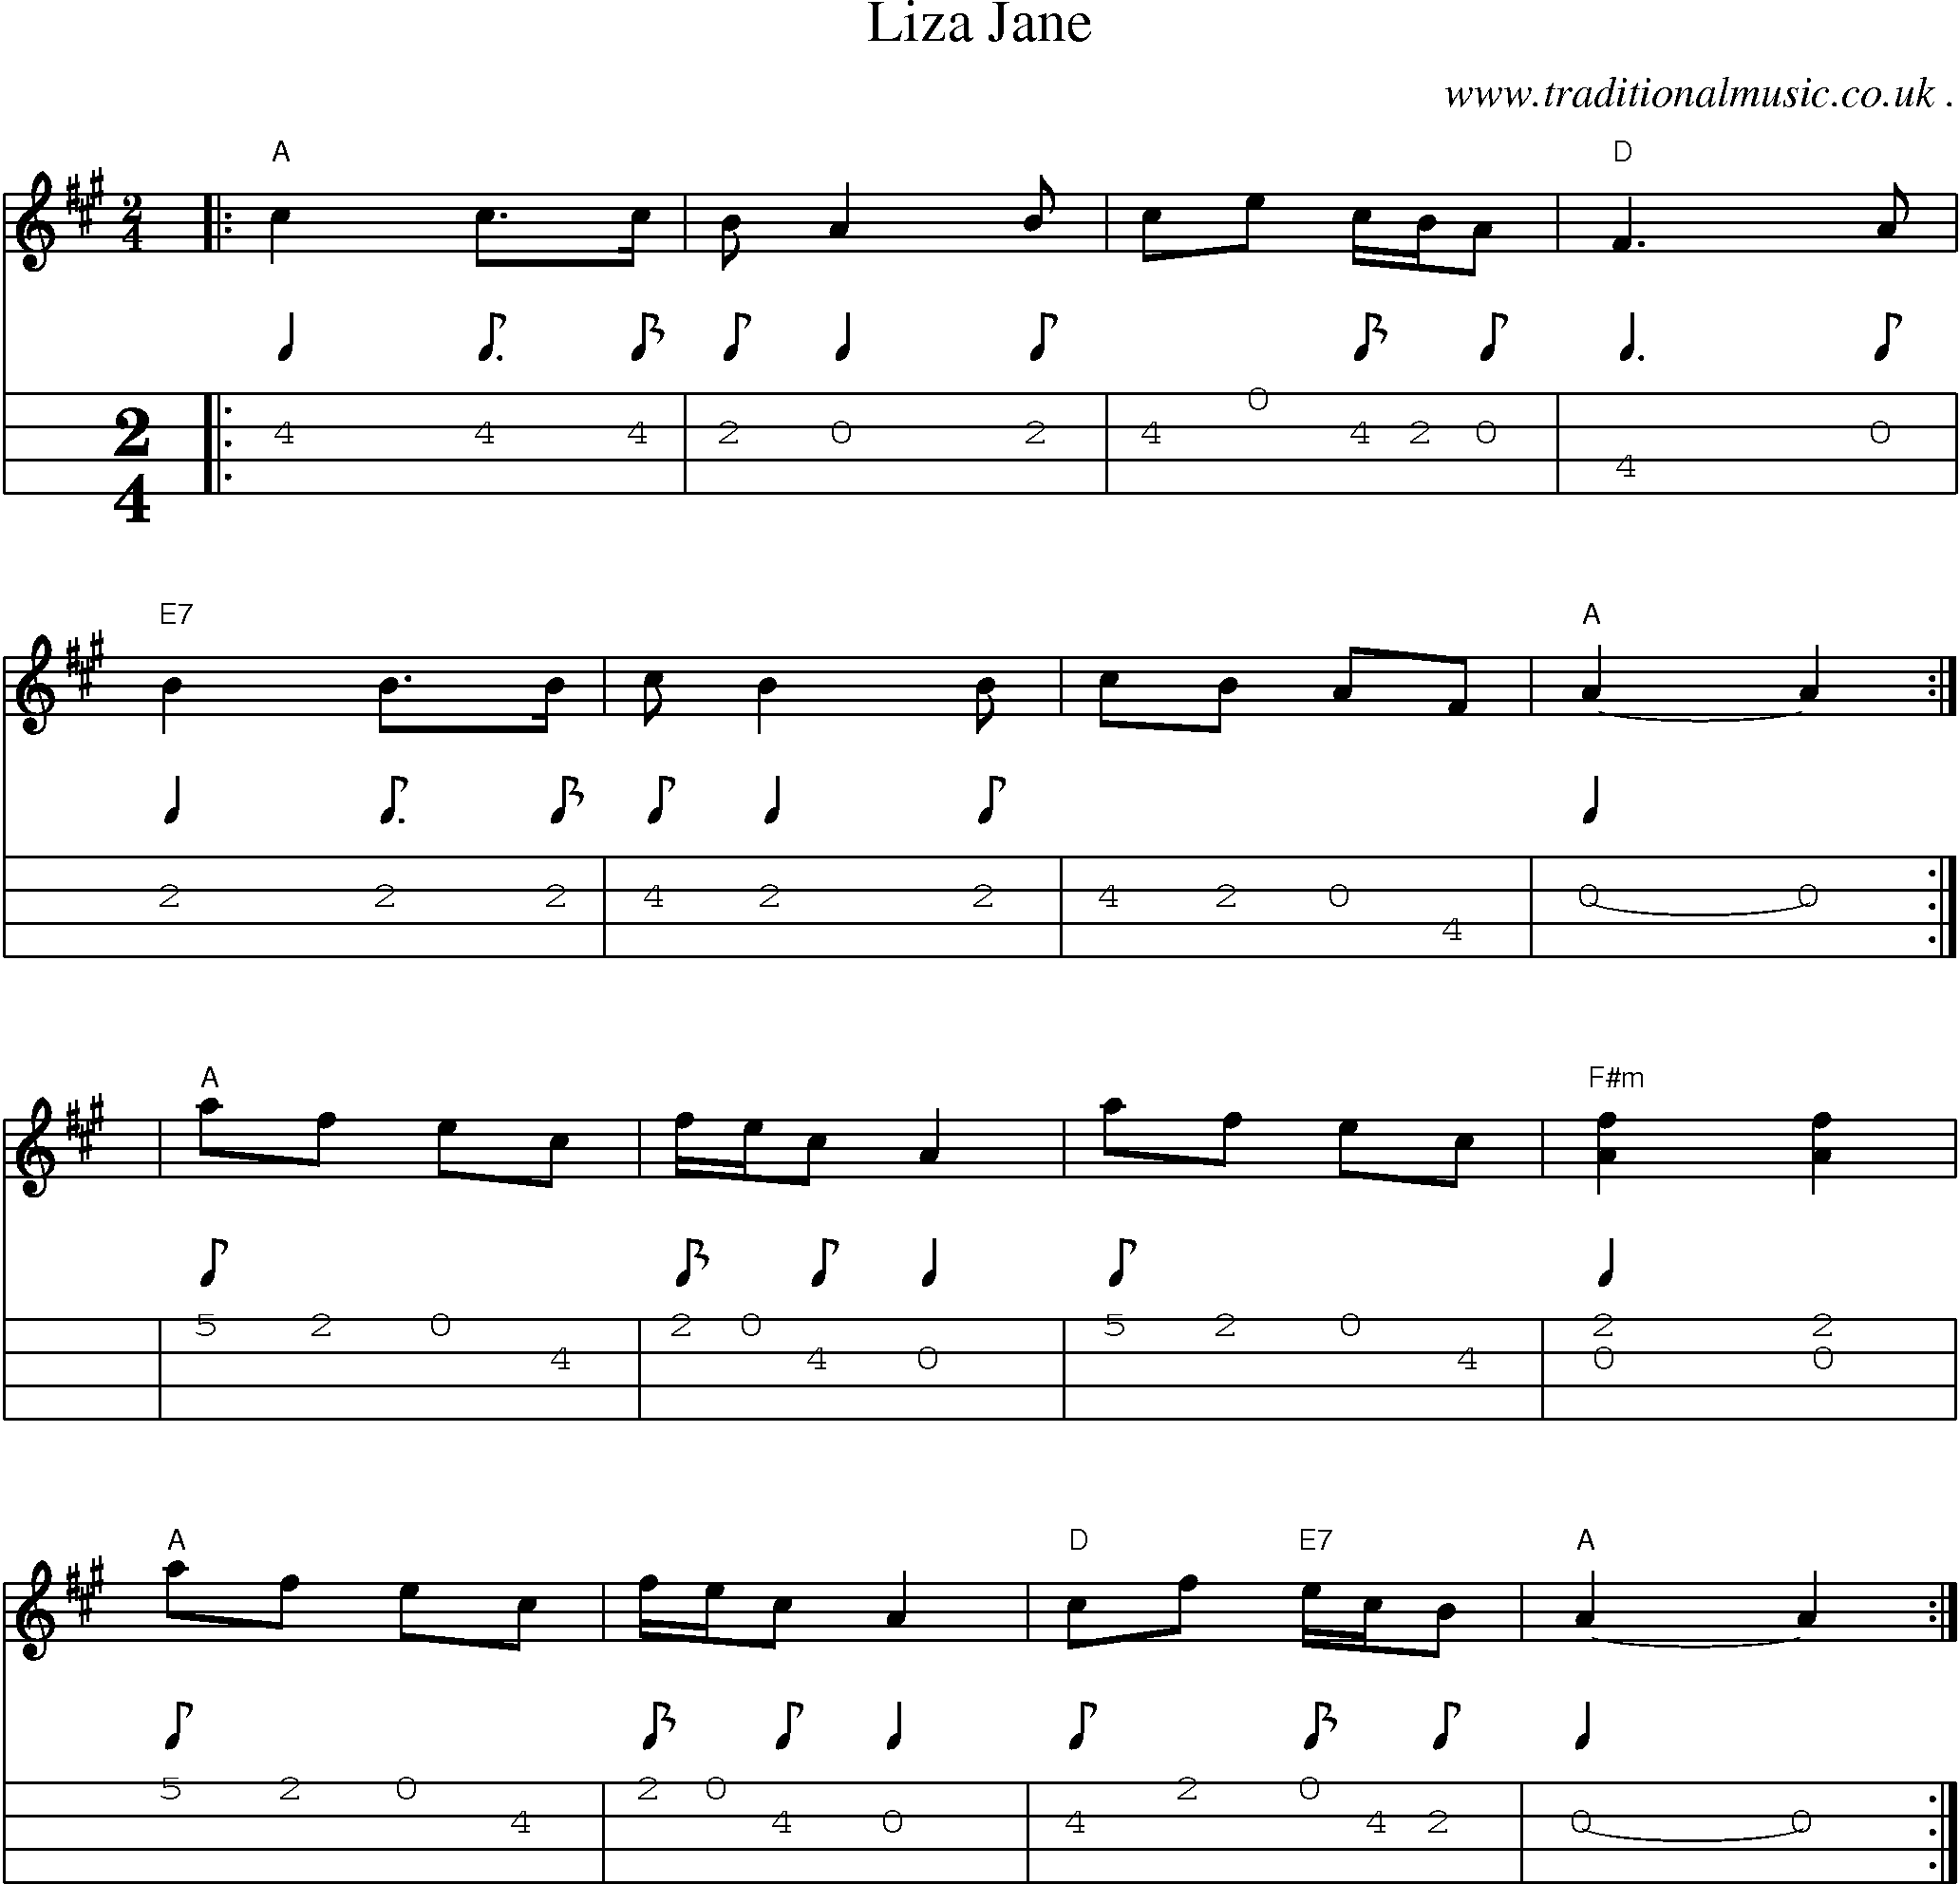 Music Score and Guitar Tabs for Liza Jane